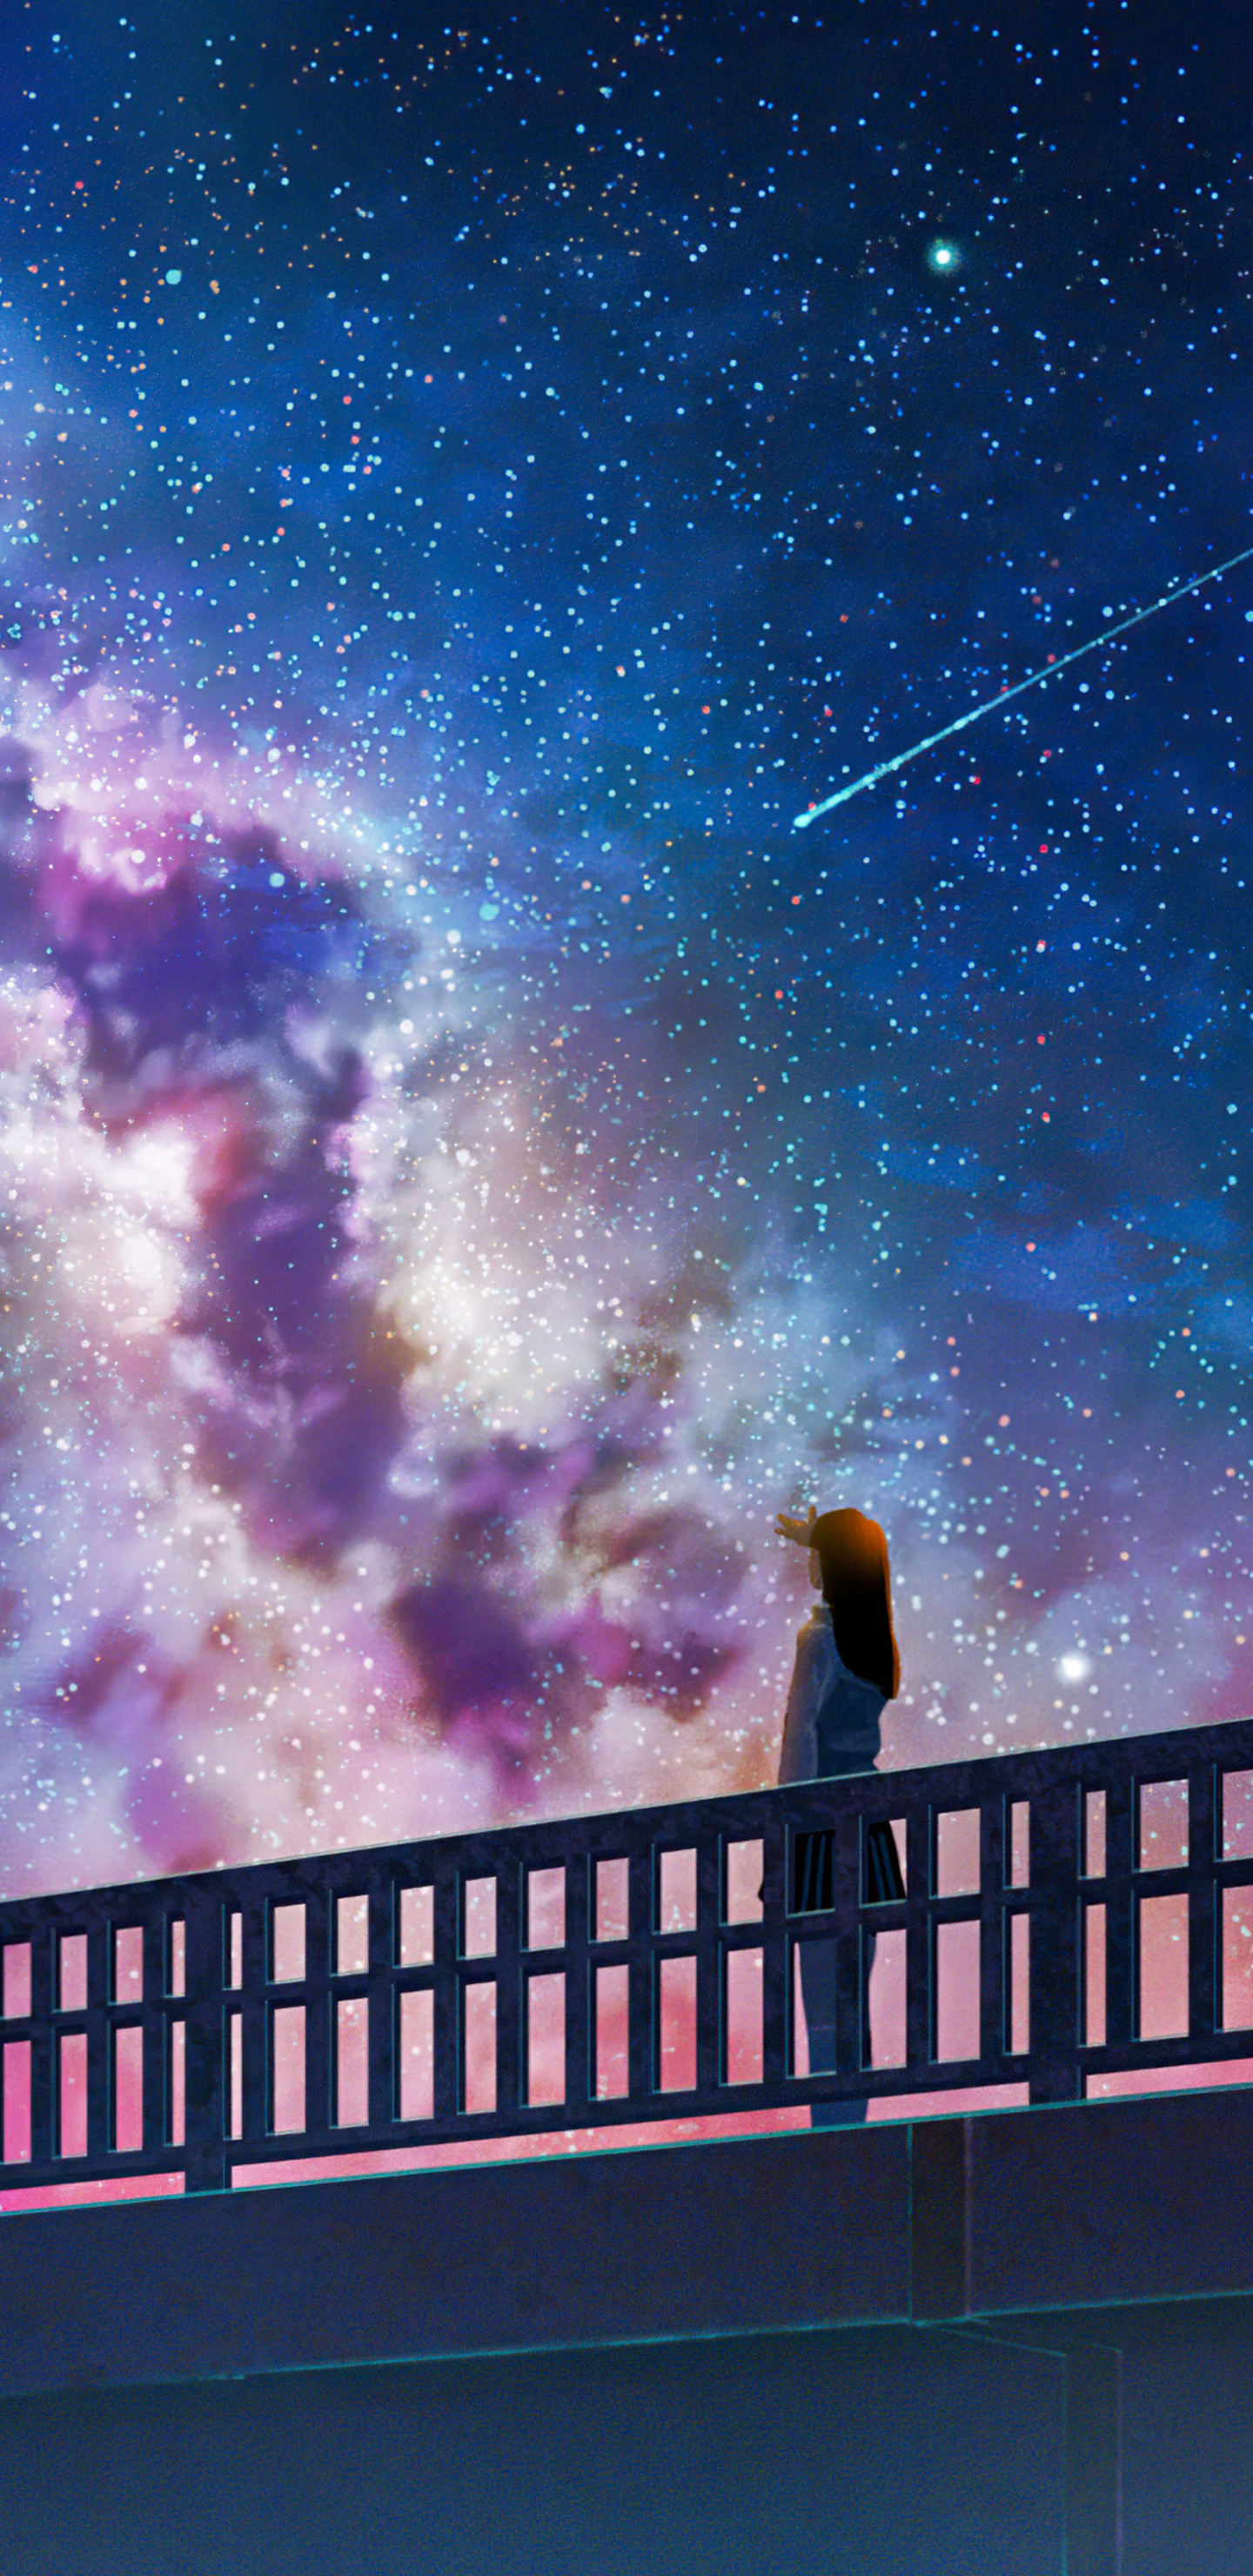 1440x2960 Anime Girl Alone At Bridge Watching The Galaxy Full Of Stars 4k Samsung  Galaxy Note 9,8, S9,S8,S8+ QHD HD 4k Wallpapers, Images, Backgrounds,  Photos and Pictures